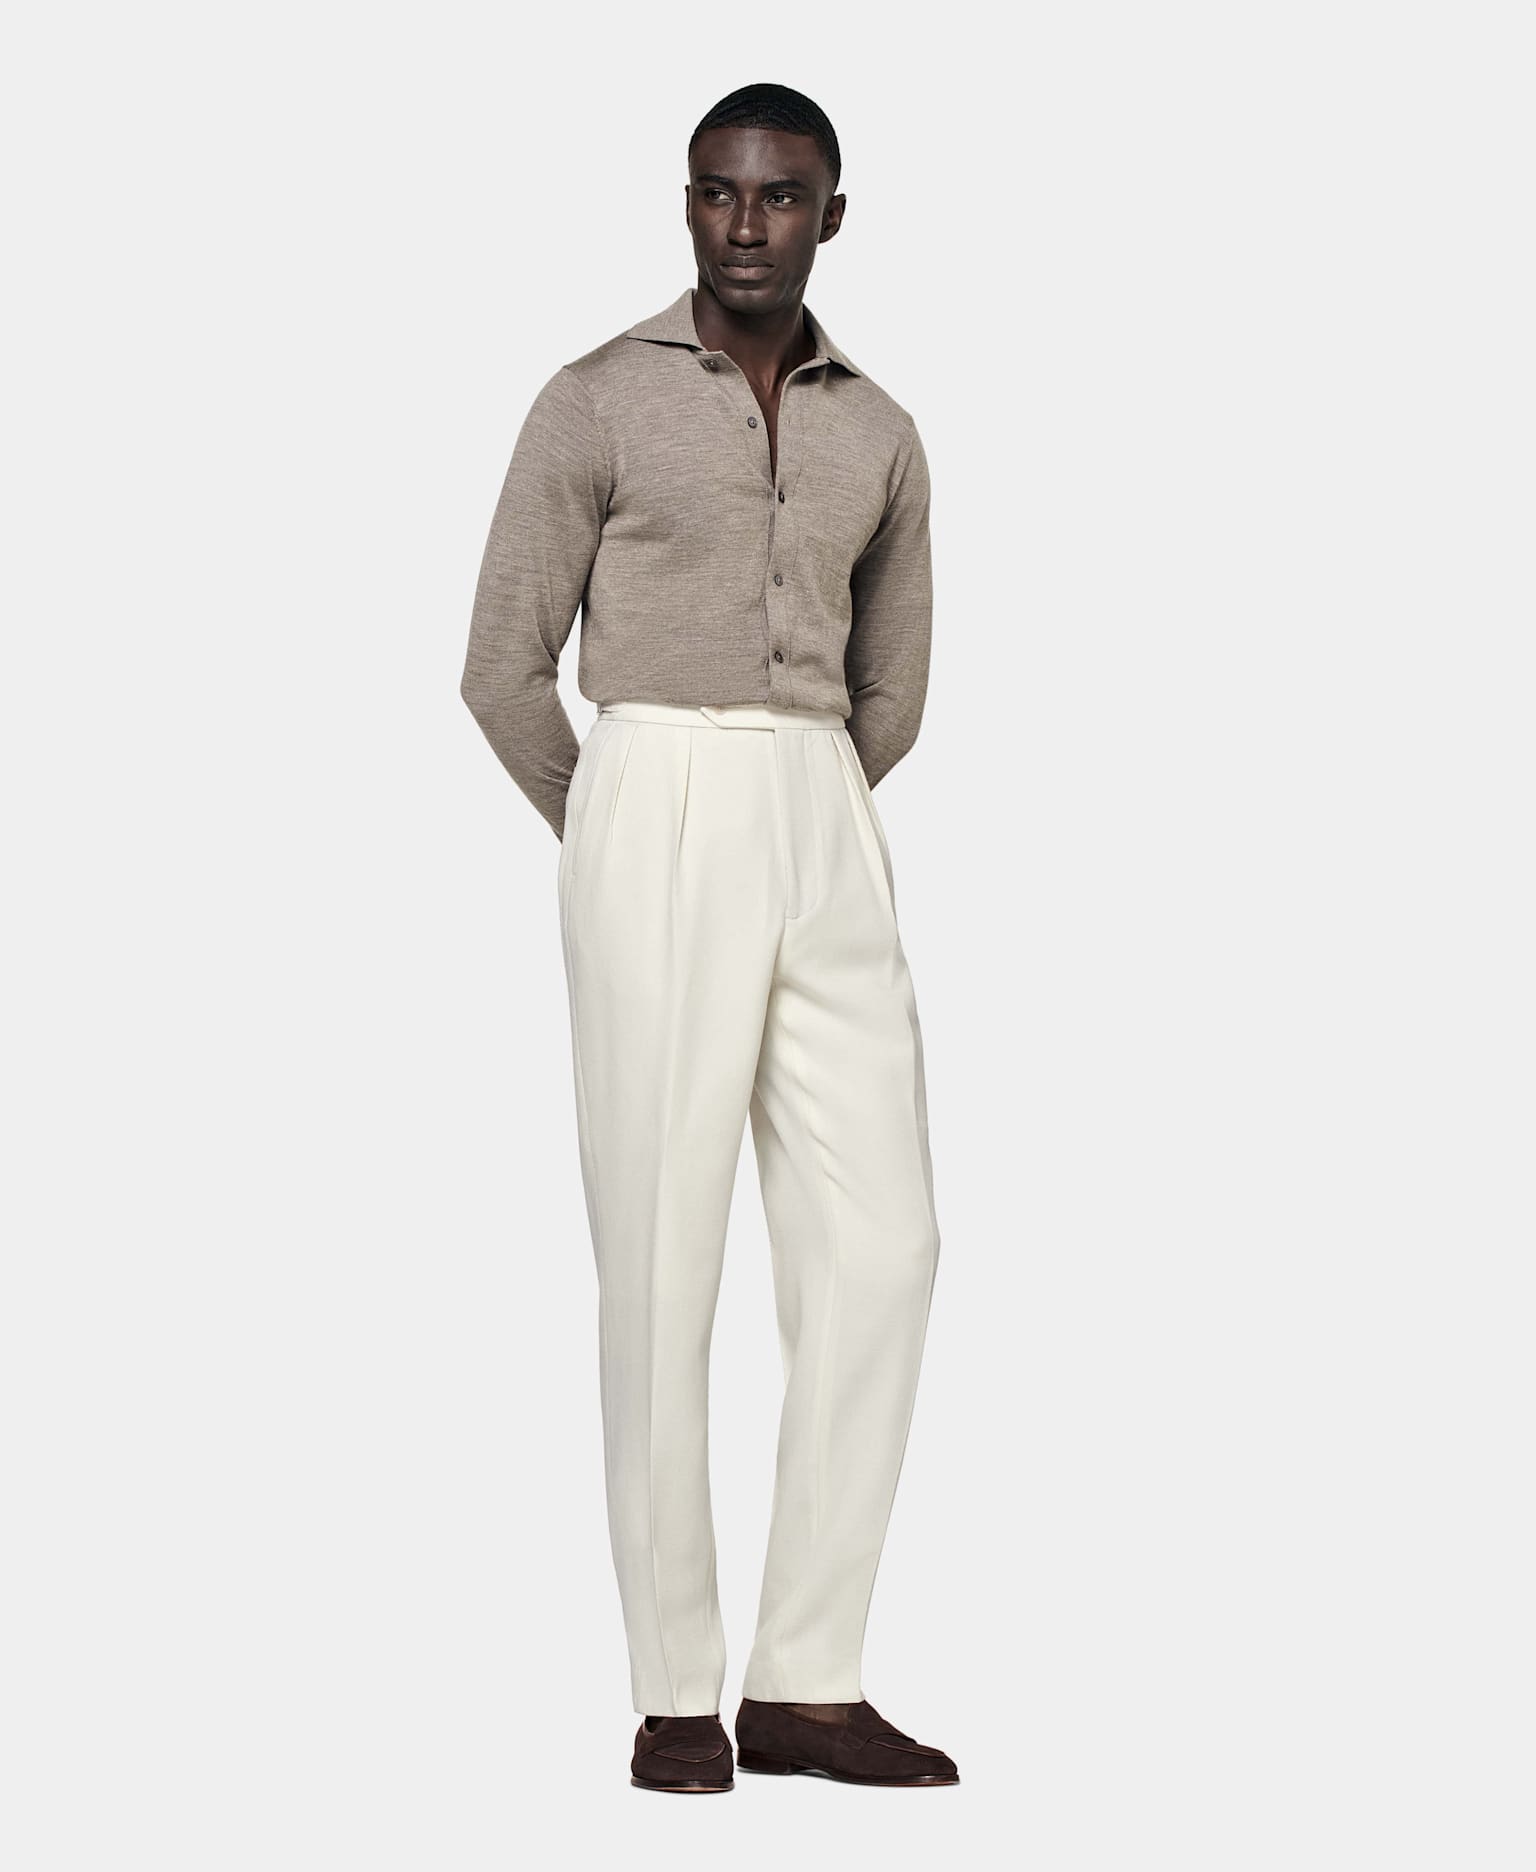 Double-pleated off-white trousers with tapered lower leg paired with brown knit and loafers.